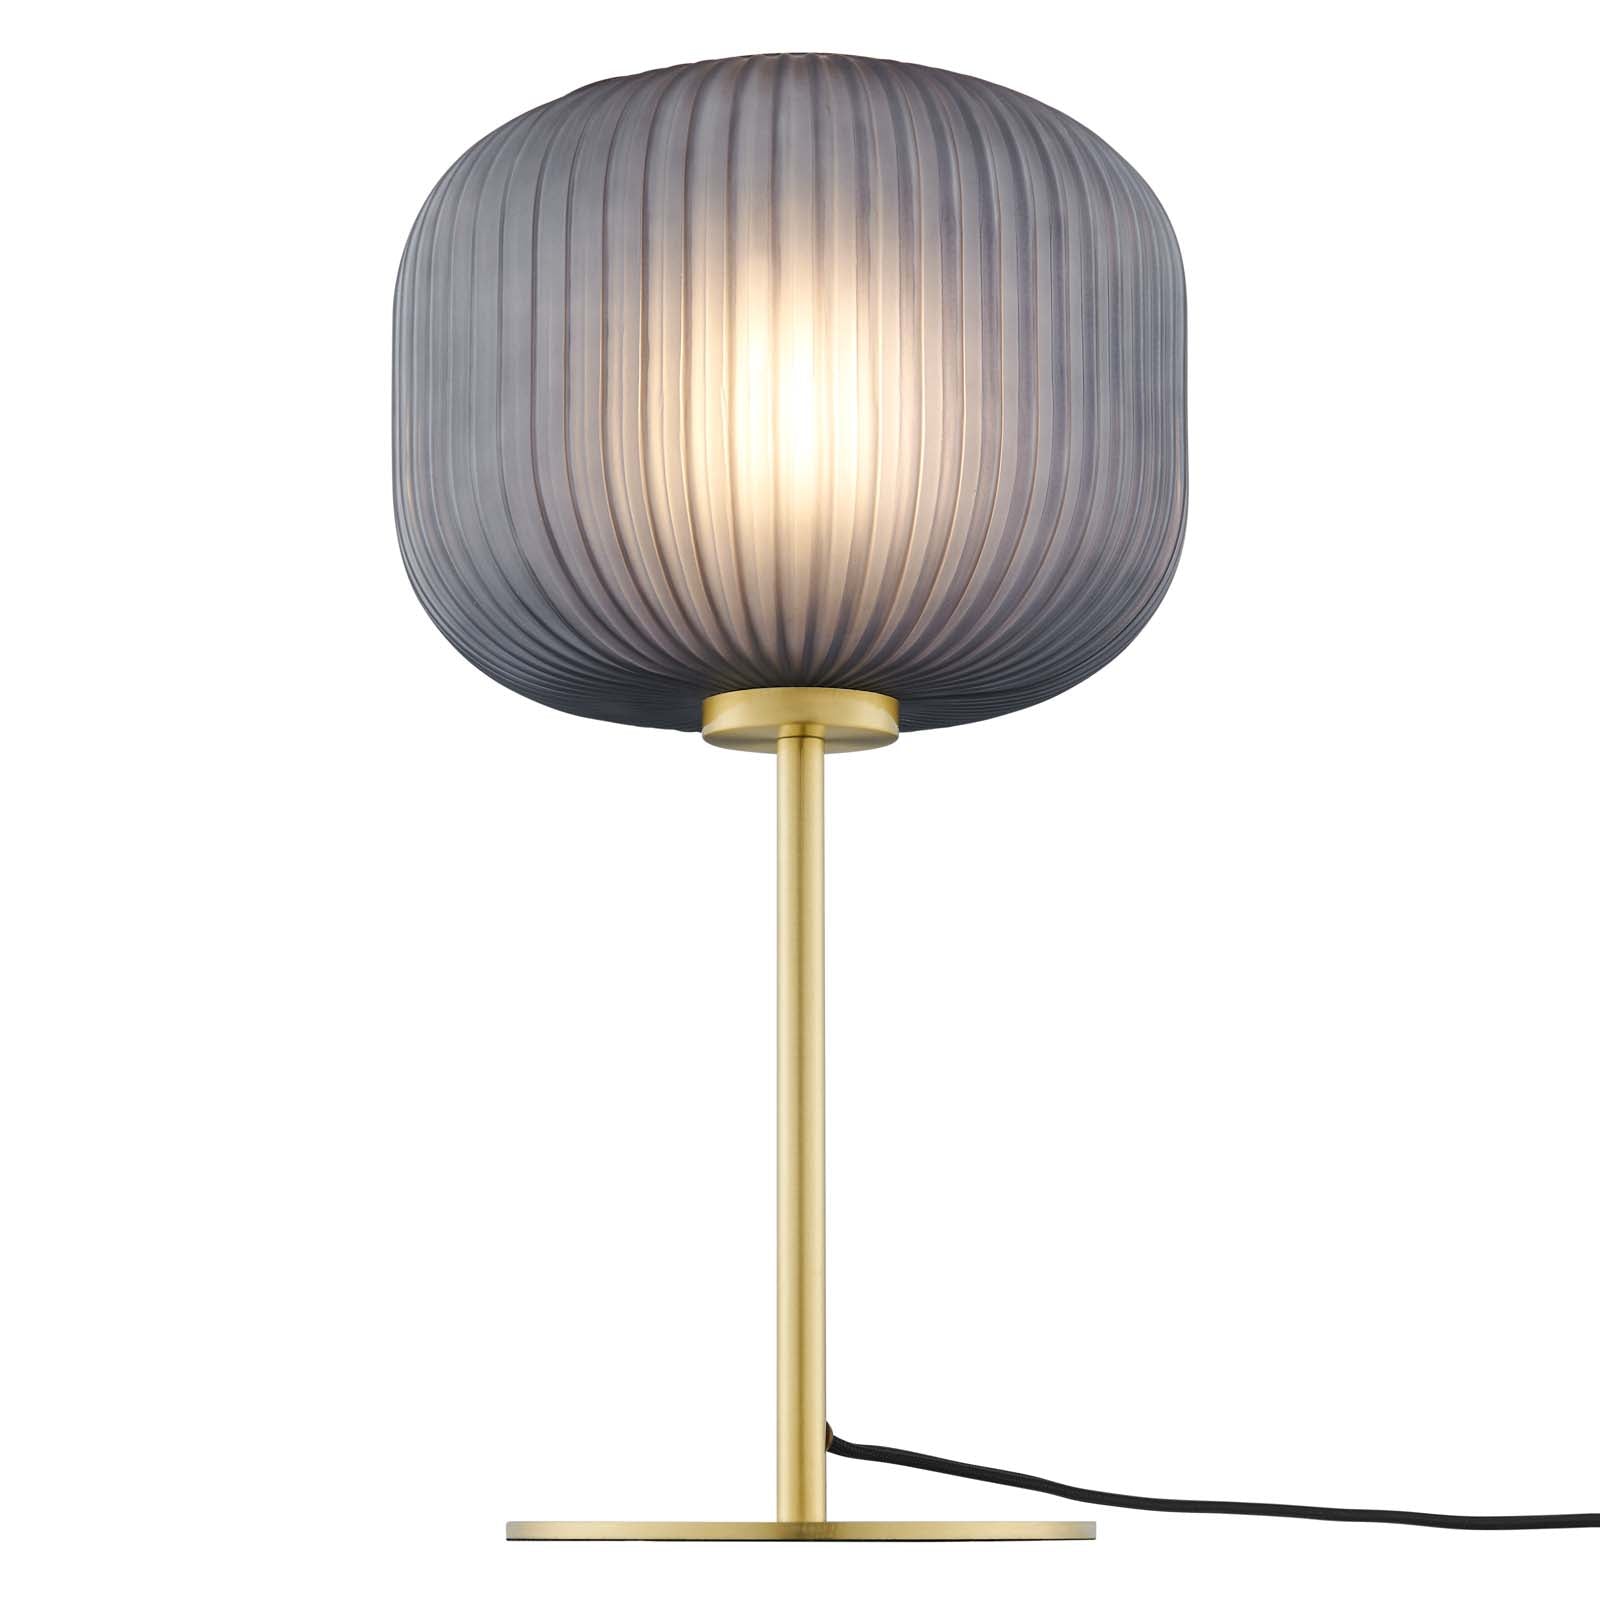 Reprise Glass Sphere Glass and Metal Table Lamp